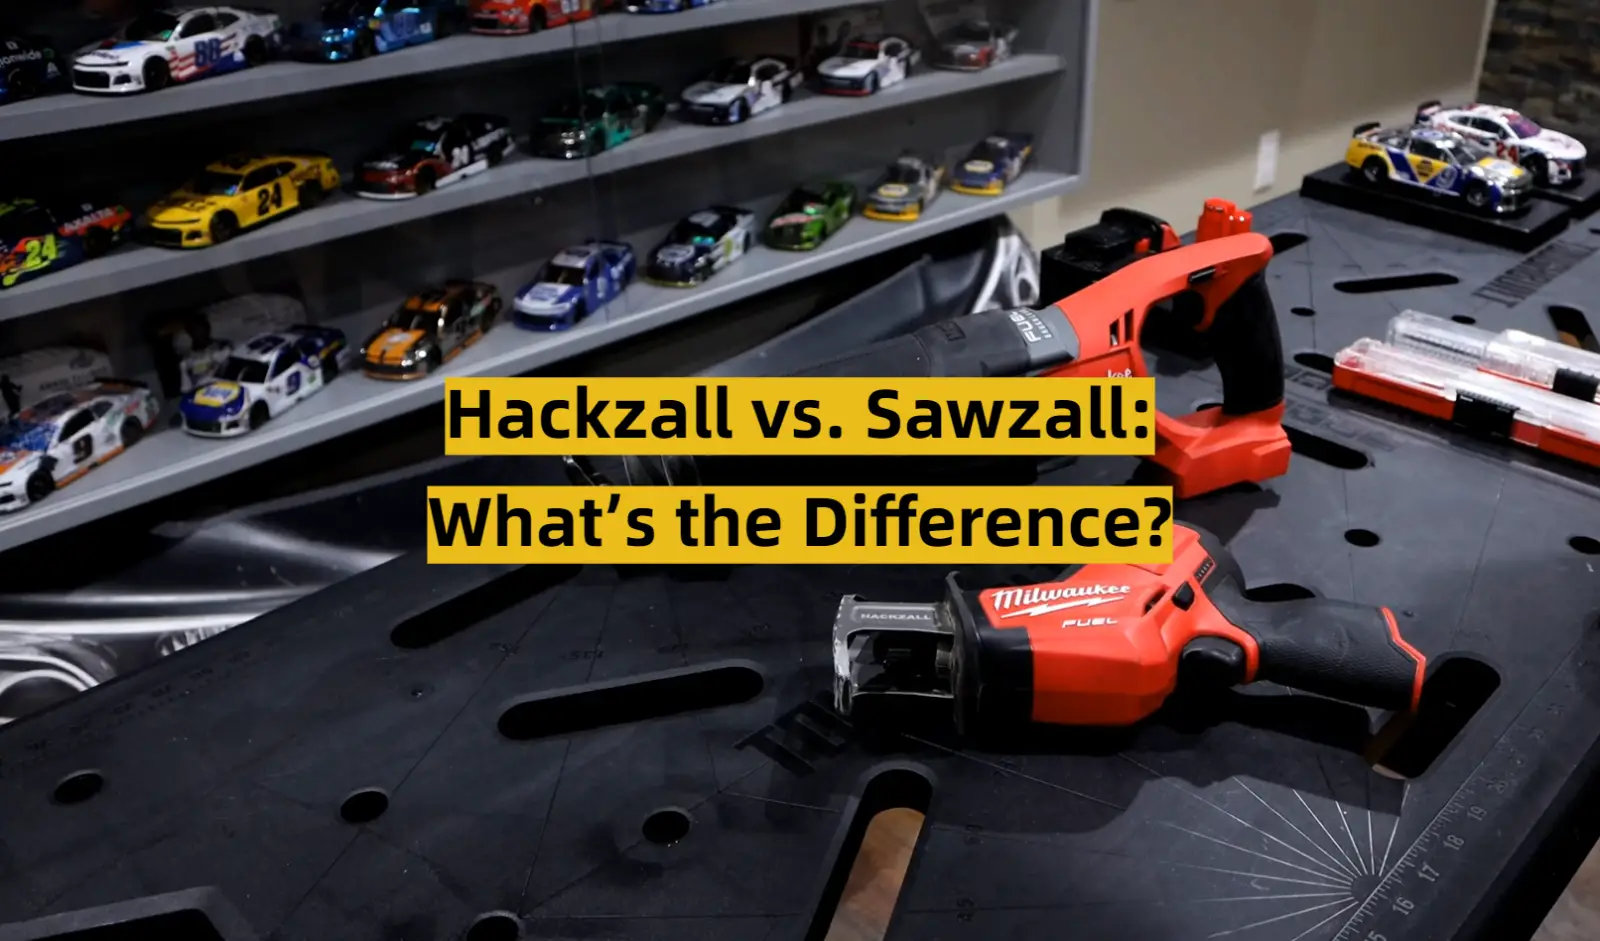 Hackzall vs. Sawzall: What’s the Difference?